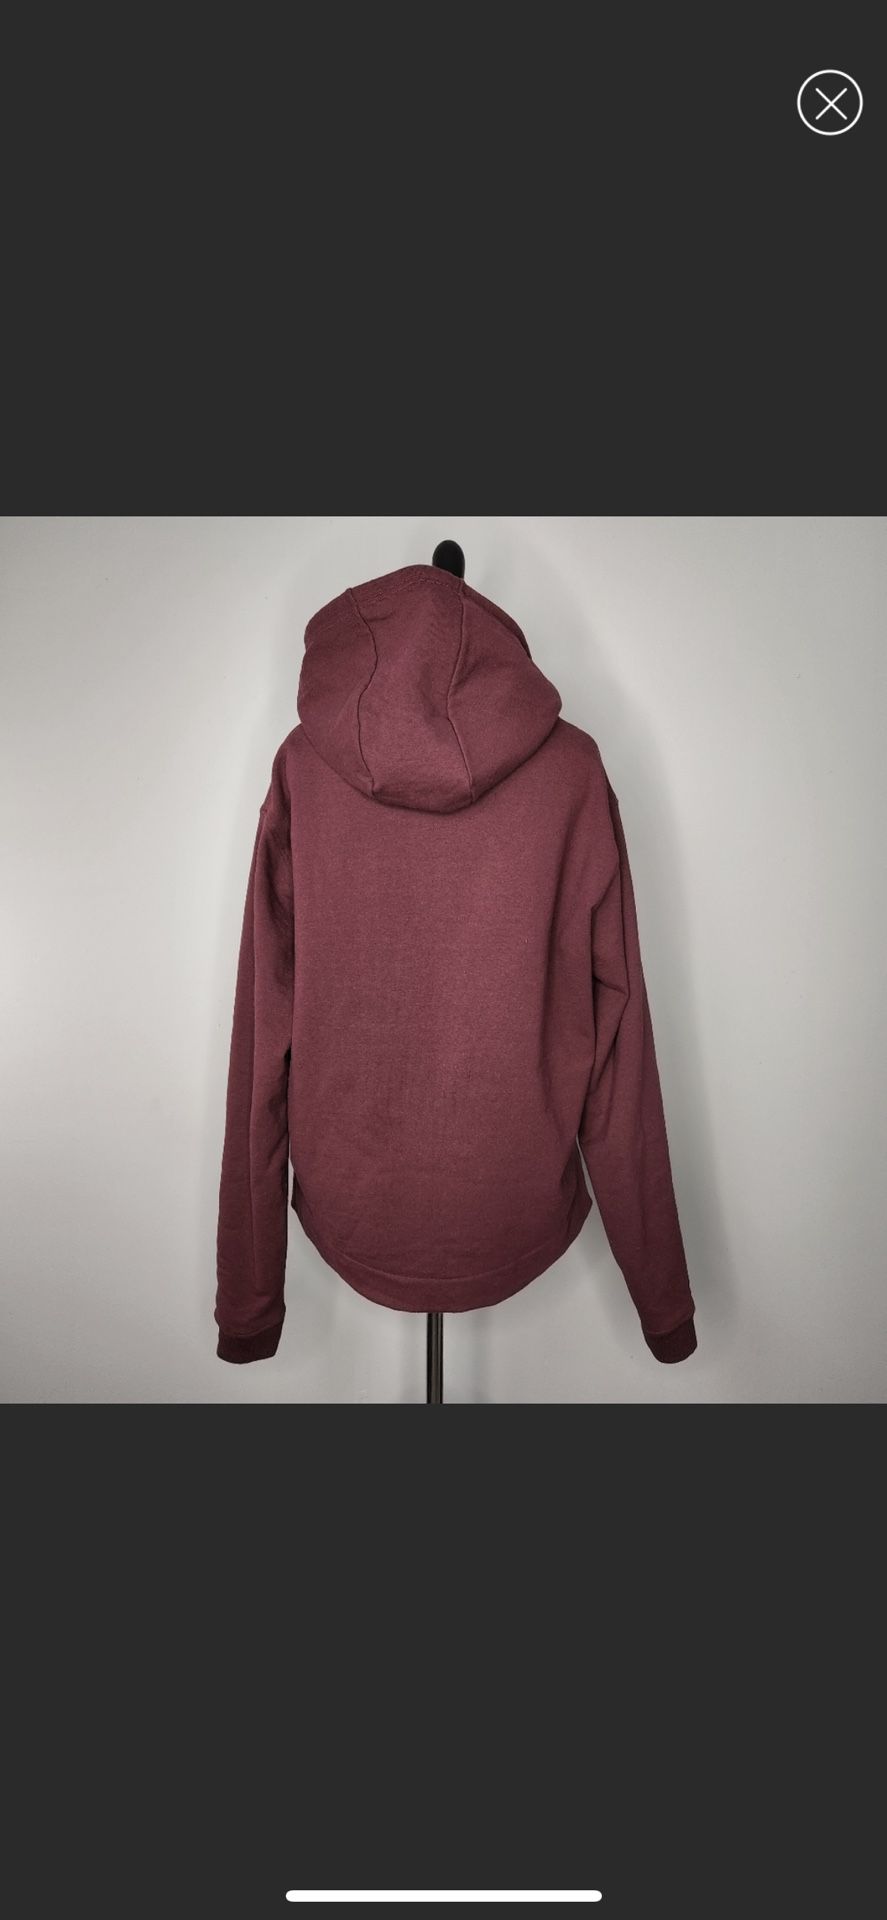 Patagonia Maroon Hoodie for Sale in Tacoma, WA - OfferUp